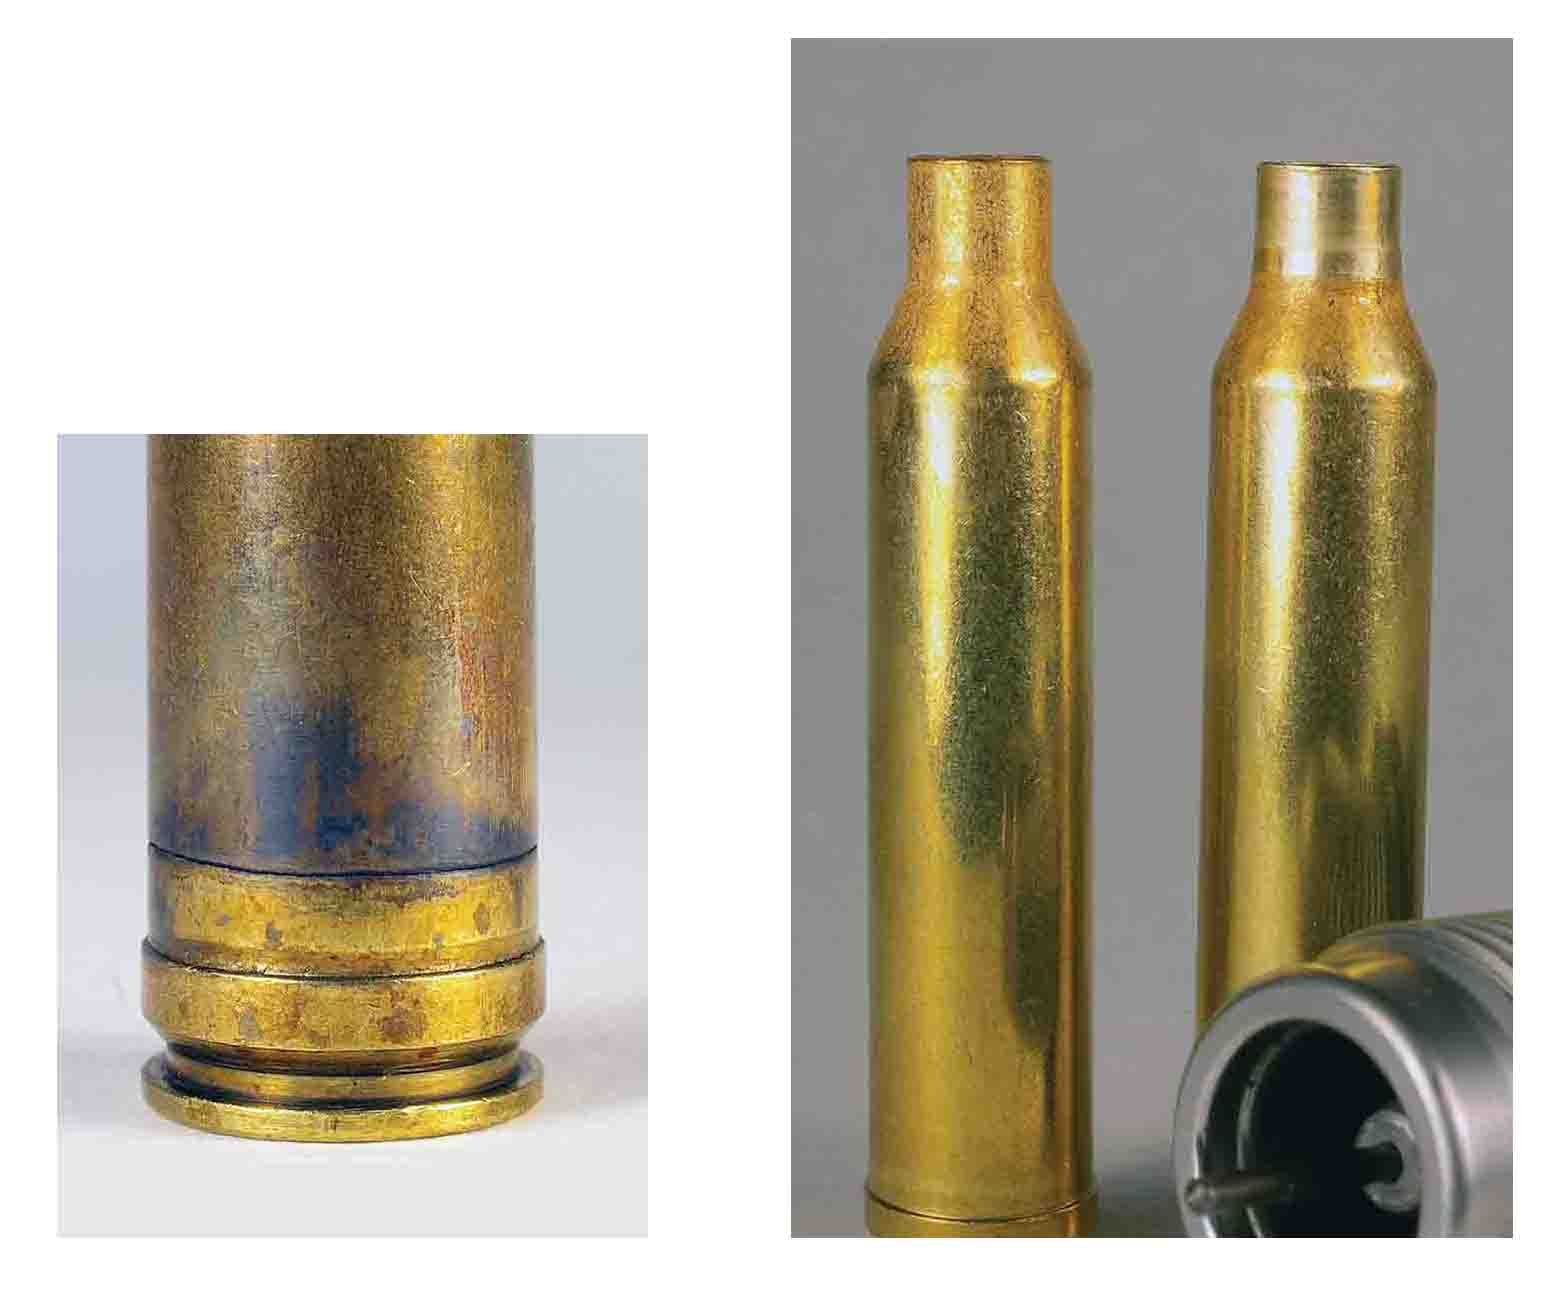 Left, new 7mm Remington Magnum cases are often quite short at the shoulder. On firing, they stretch so much they become thin at the web and are likely to split around the web when reloaded. Right, expanding the necks of new cases, then necking them down so they fit the chamber with some resistance, minimizes stretching.